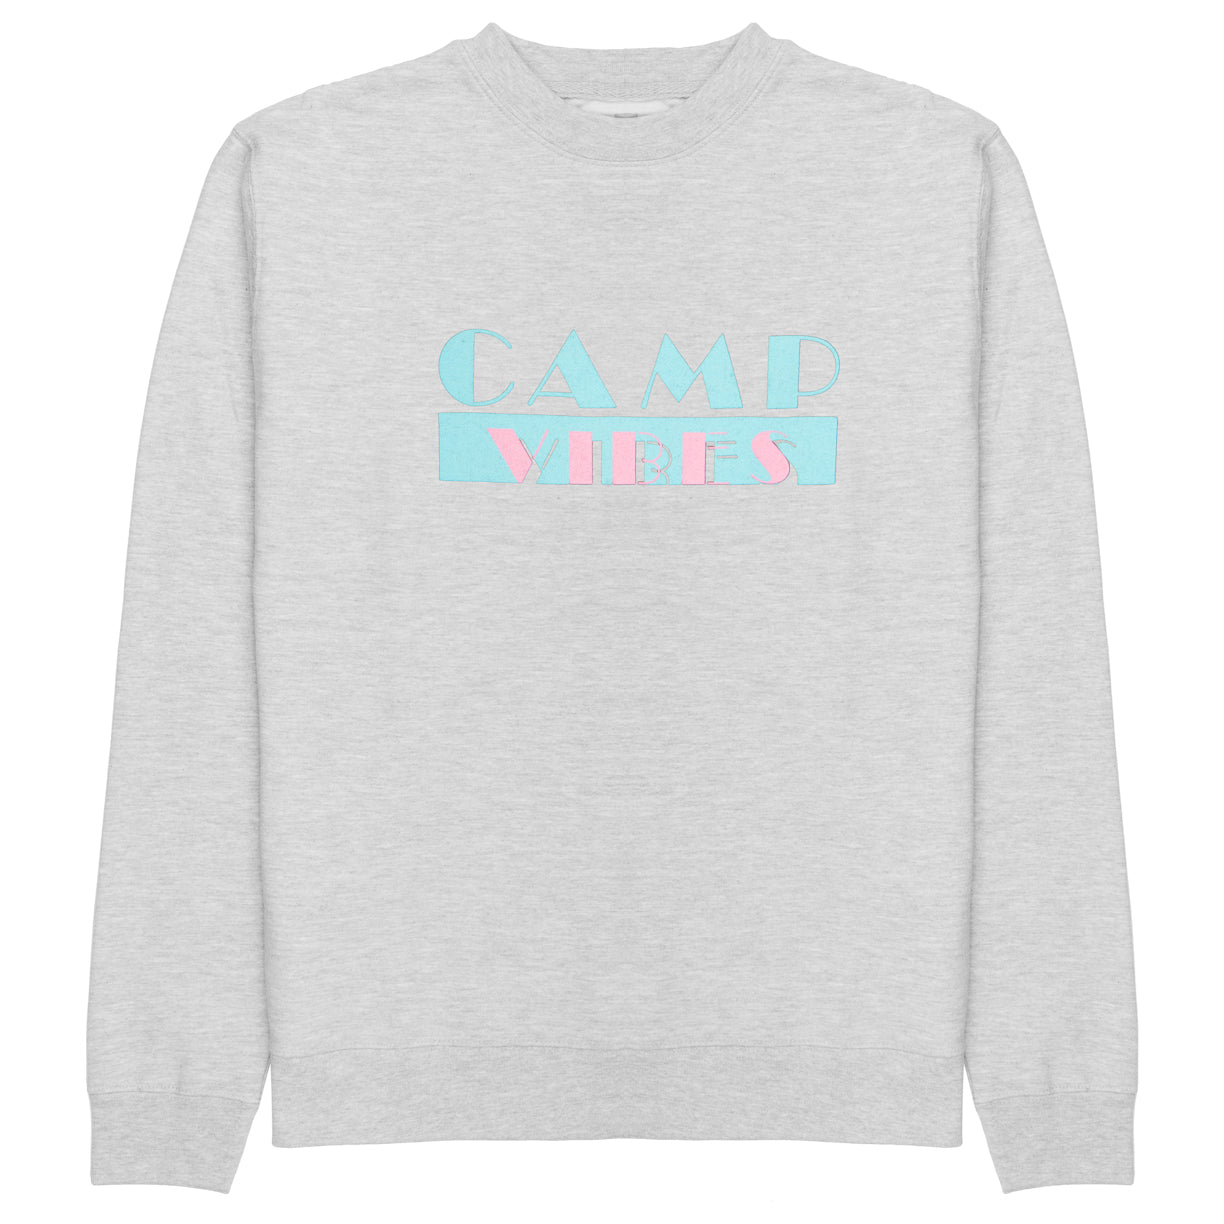 Vices Crew product Gray Heather M 